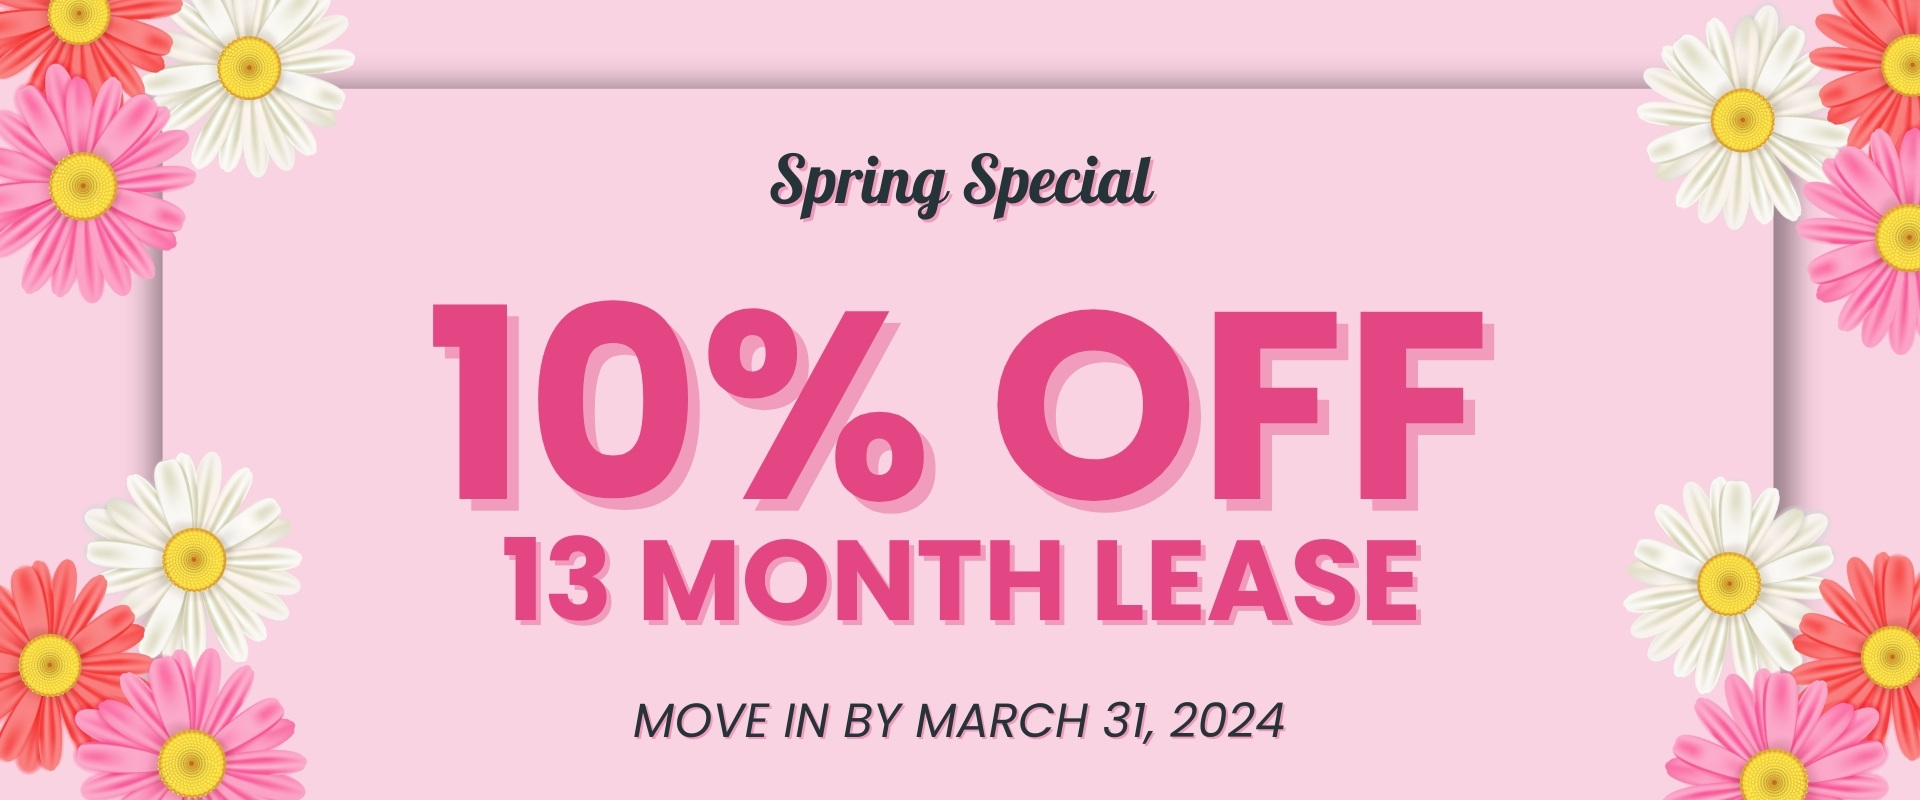 Spring Special 10% off 13 month lease move in by March 31, 2024